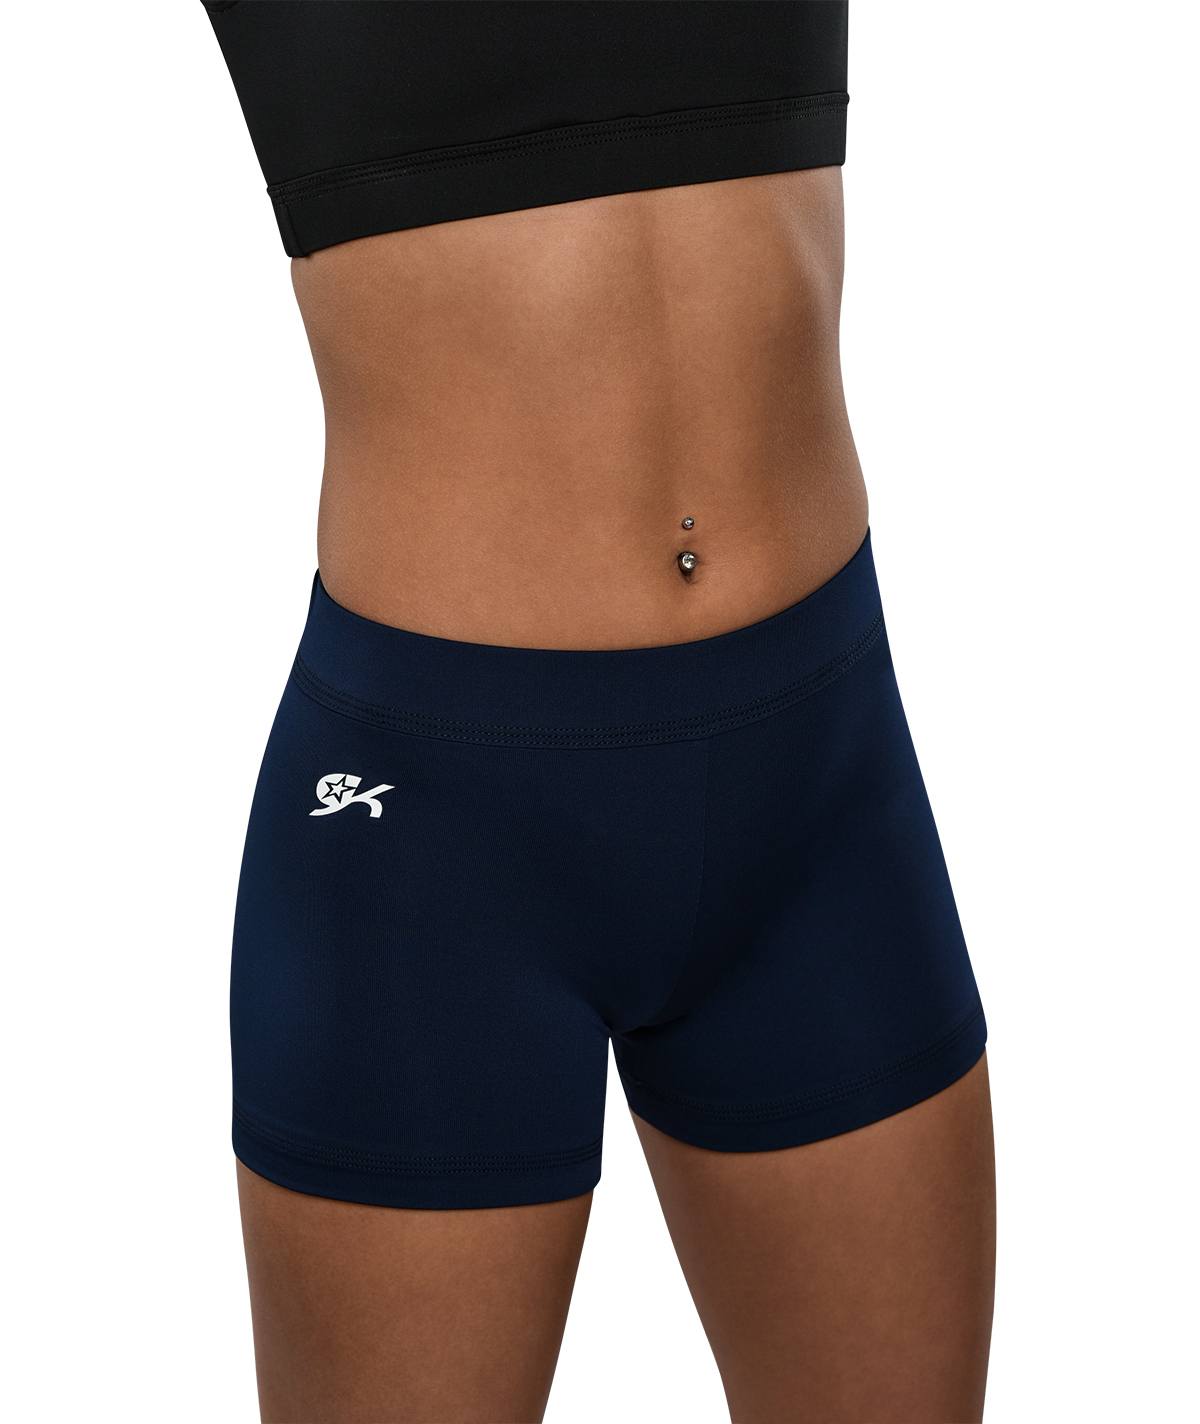 GK All Star Perfect Fit Short